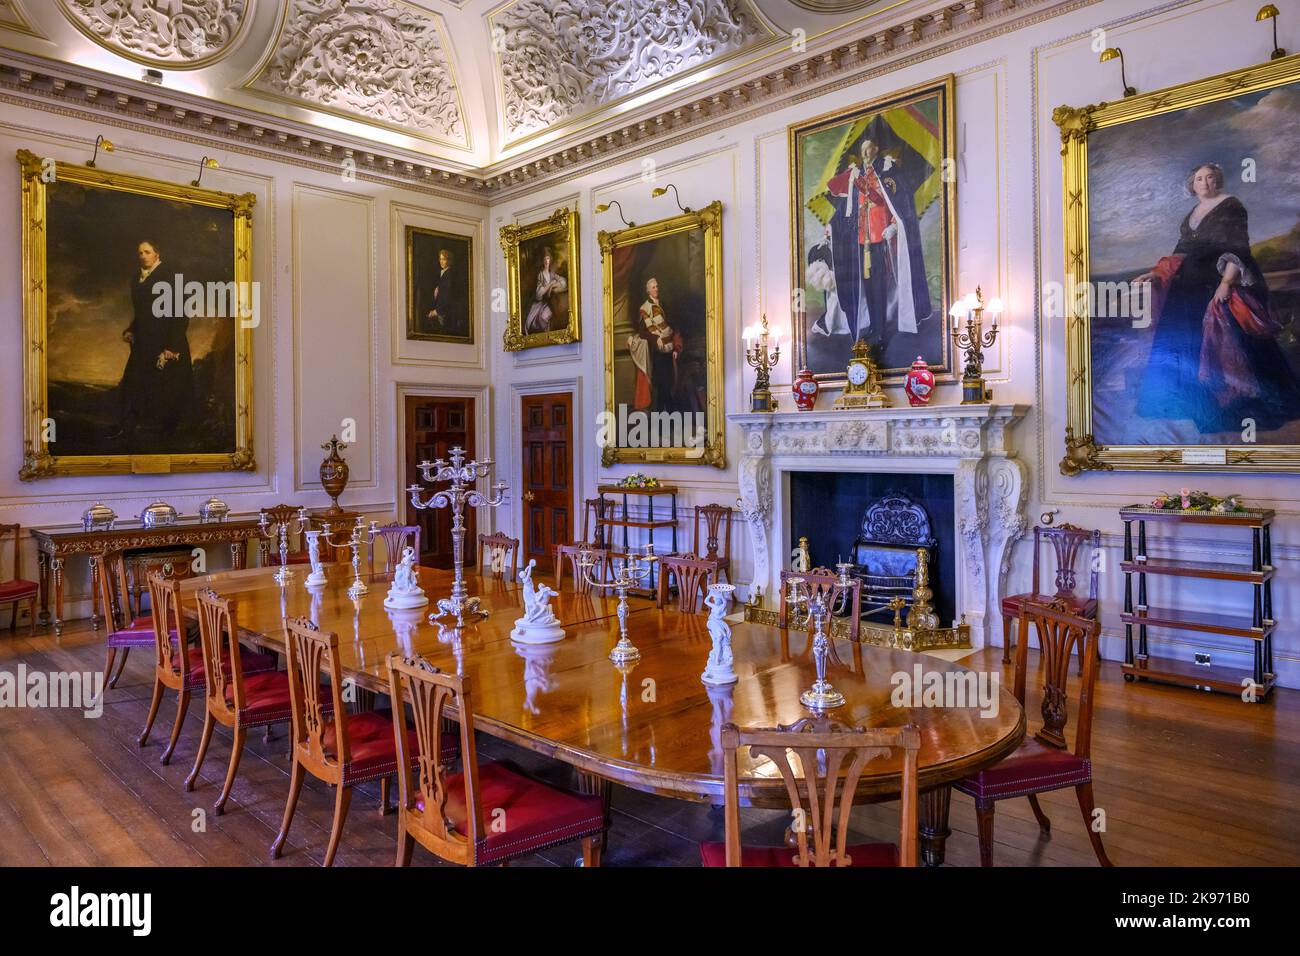 State Dining Room of Harewood House, près de Leeds, West Yorkshire, Angleterre, Royaume-Uni Banque D'Images